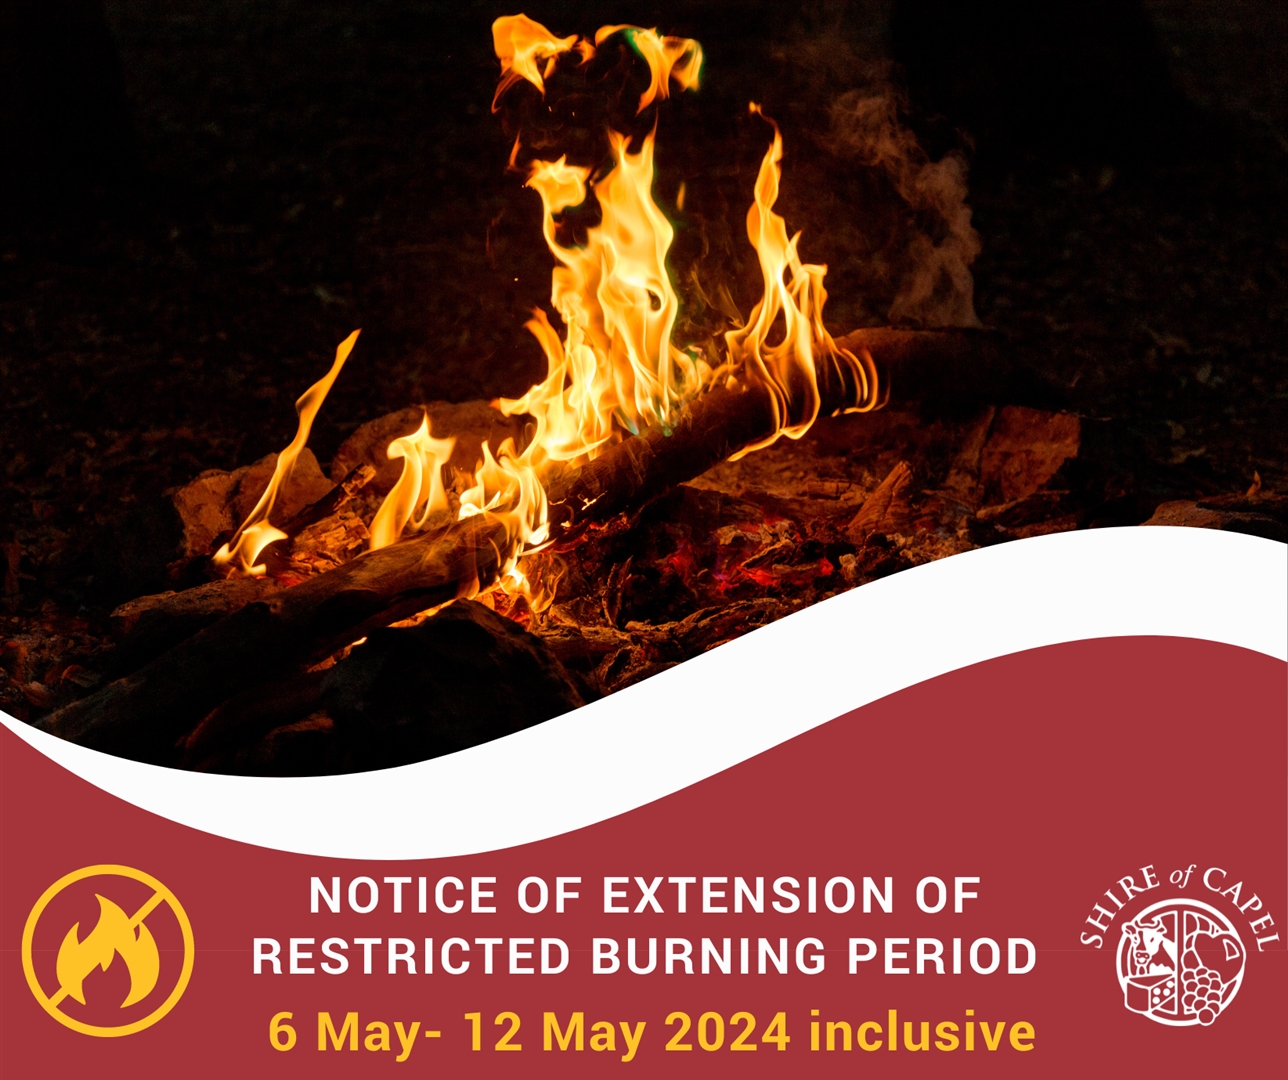 Copy of Notice of Extension of Prohibited Burning Period (5)